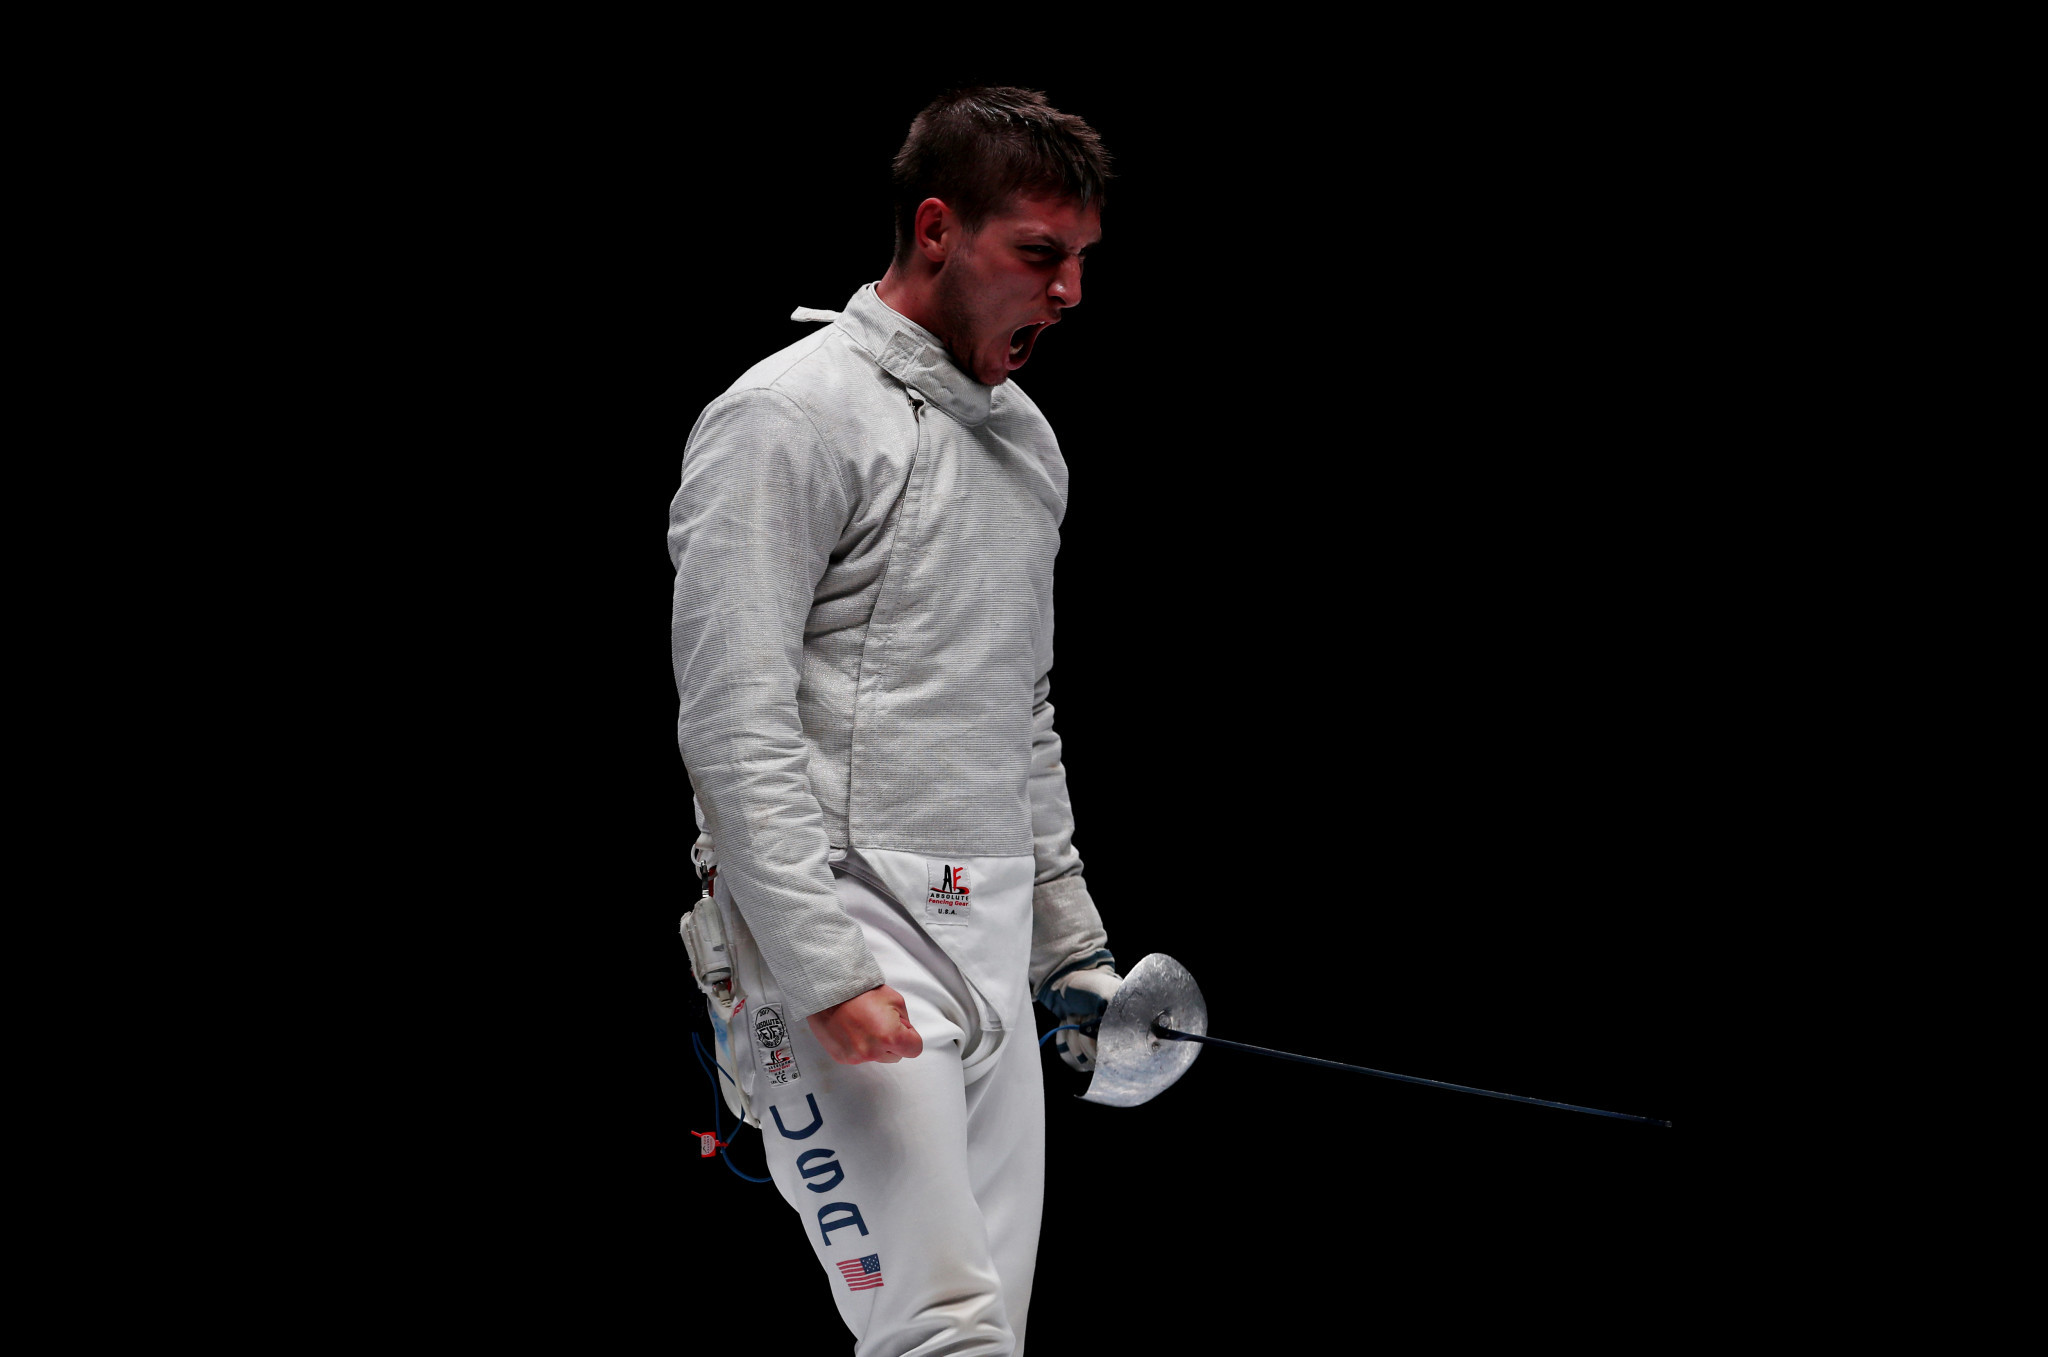 Fencers sweep USOC Best of July awards following success at World Championships